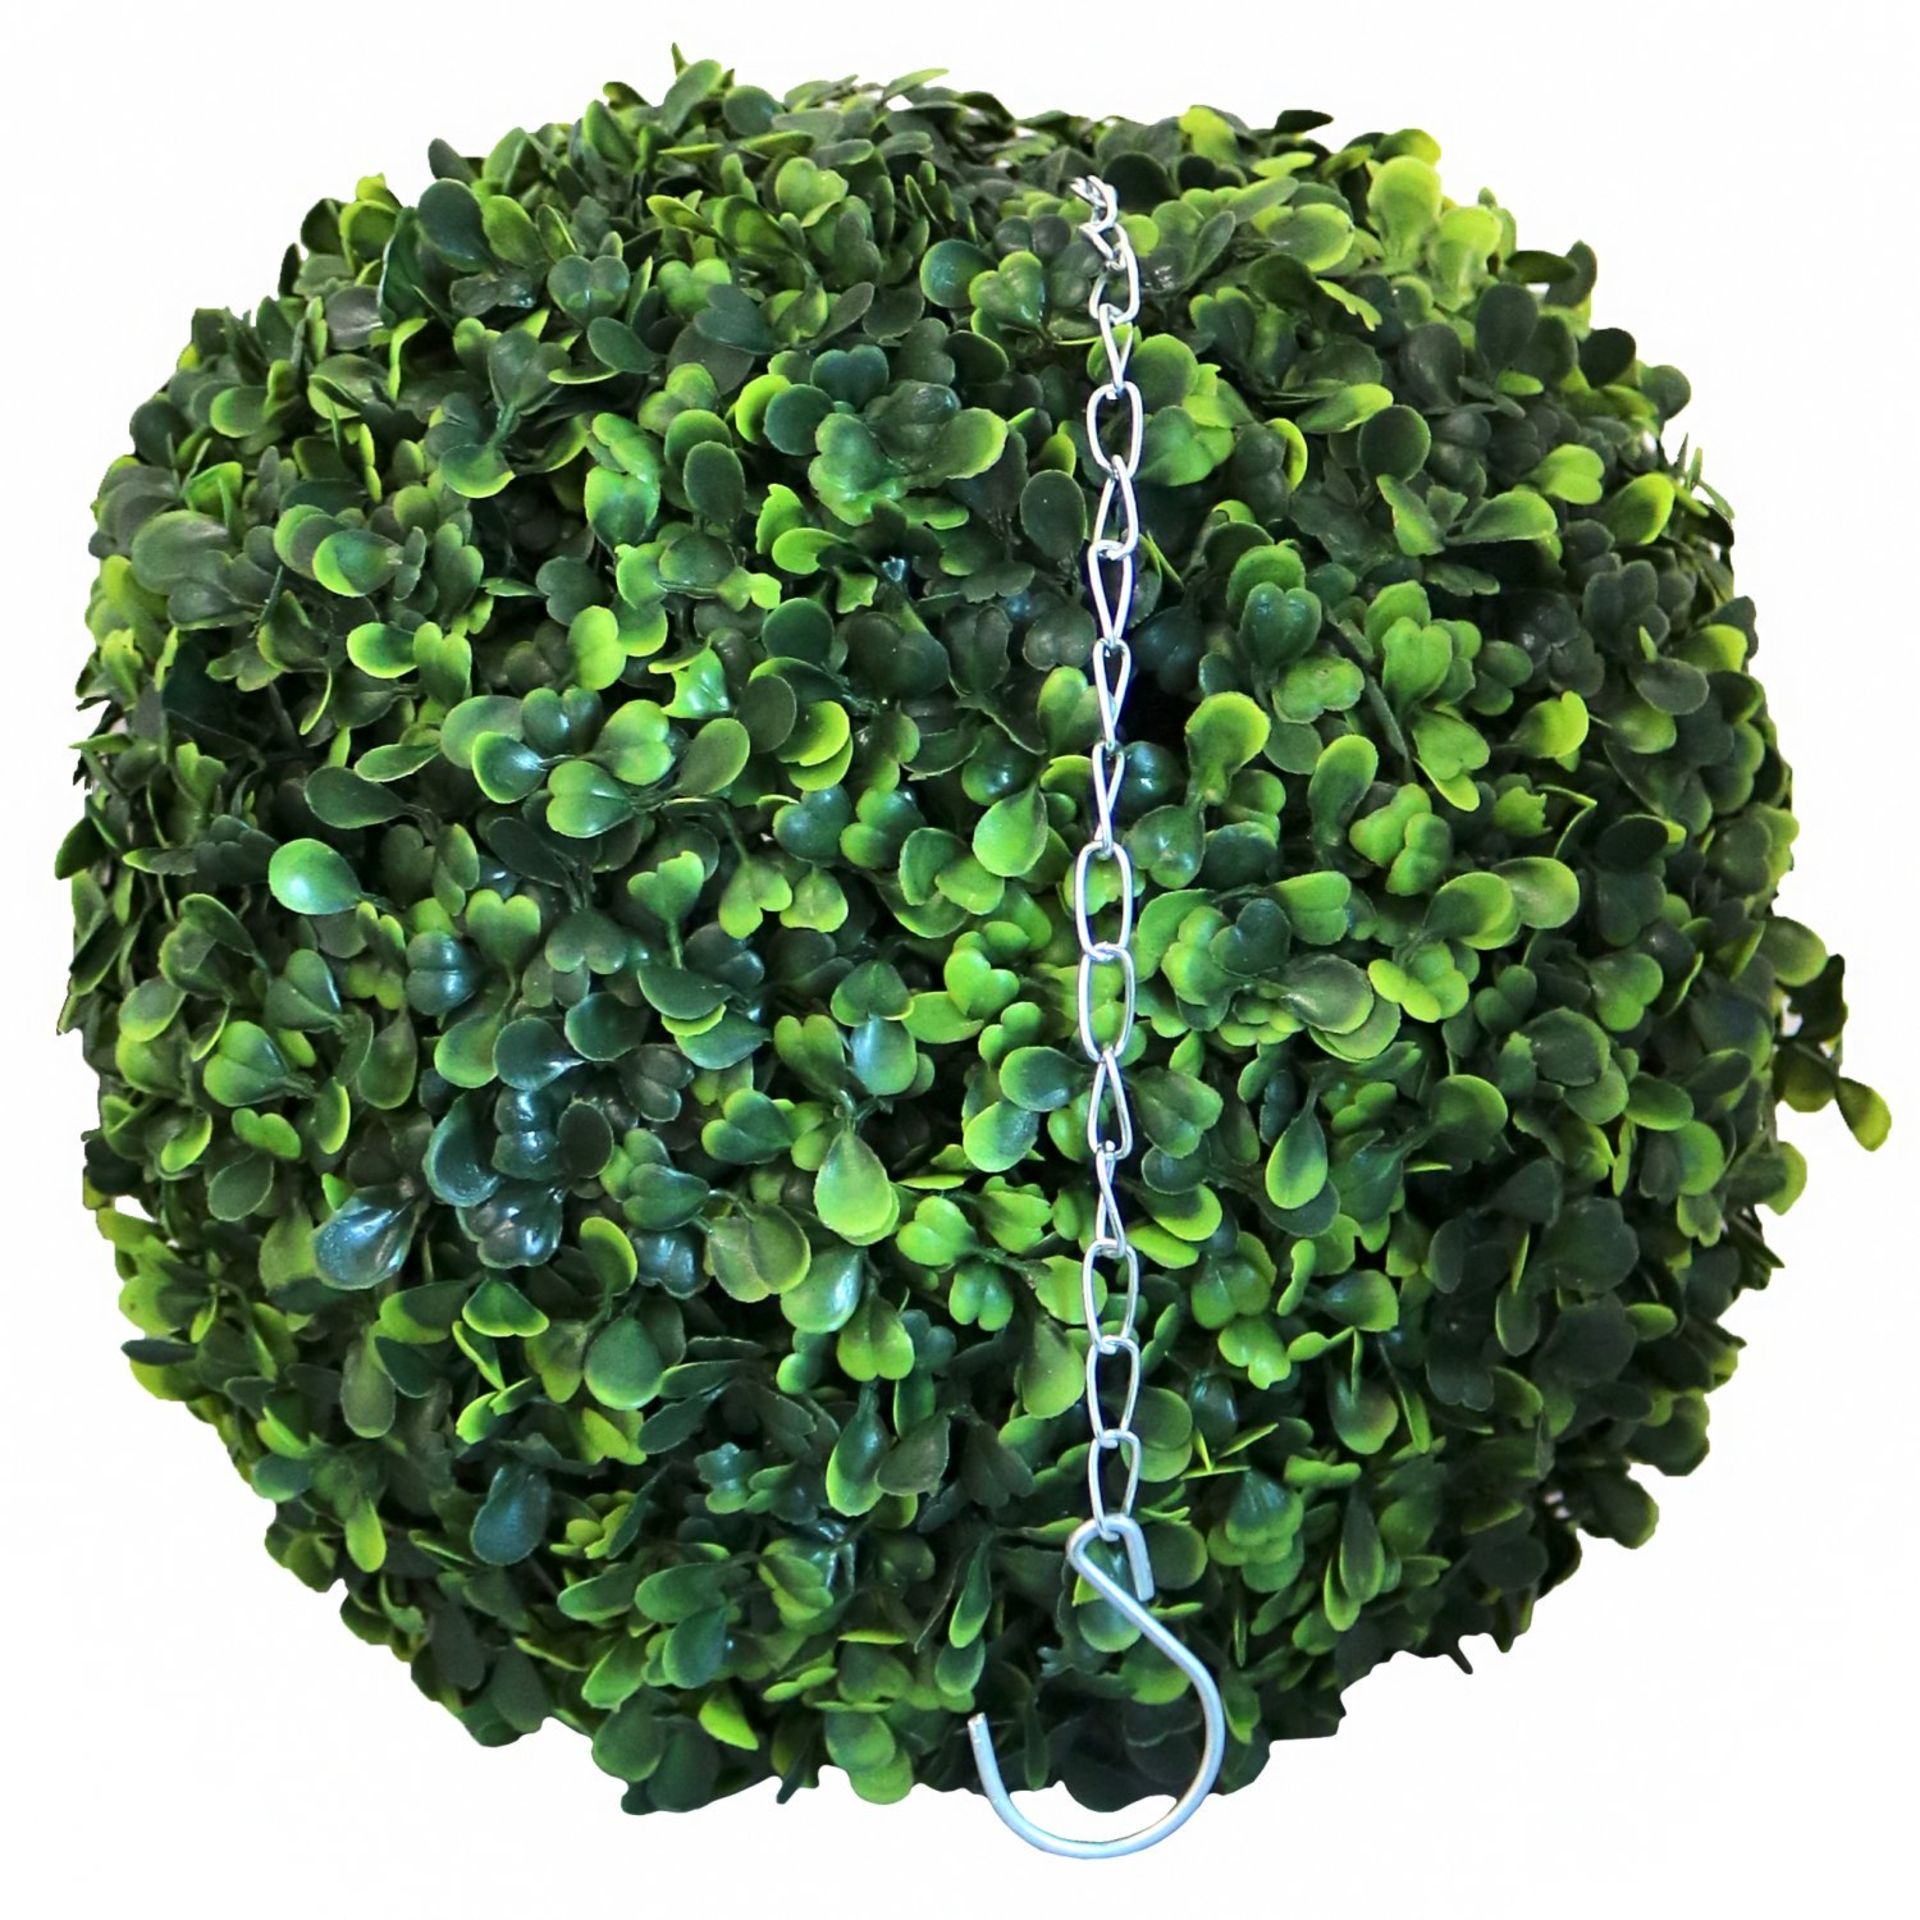 (RU340) Artificial 28cm Hanging Topiary Tree Boxwood Buxus Ball Add some style to your doo... - Image 2 of 2